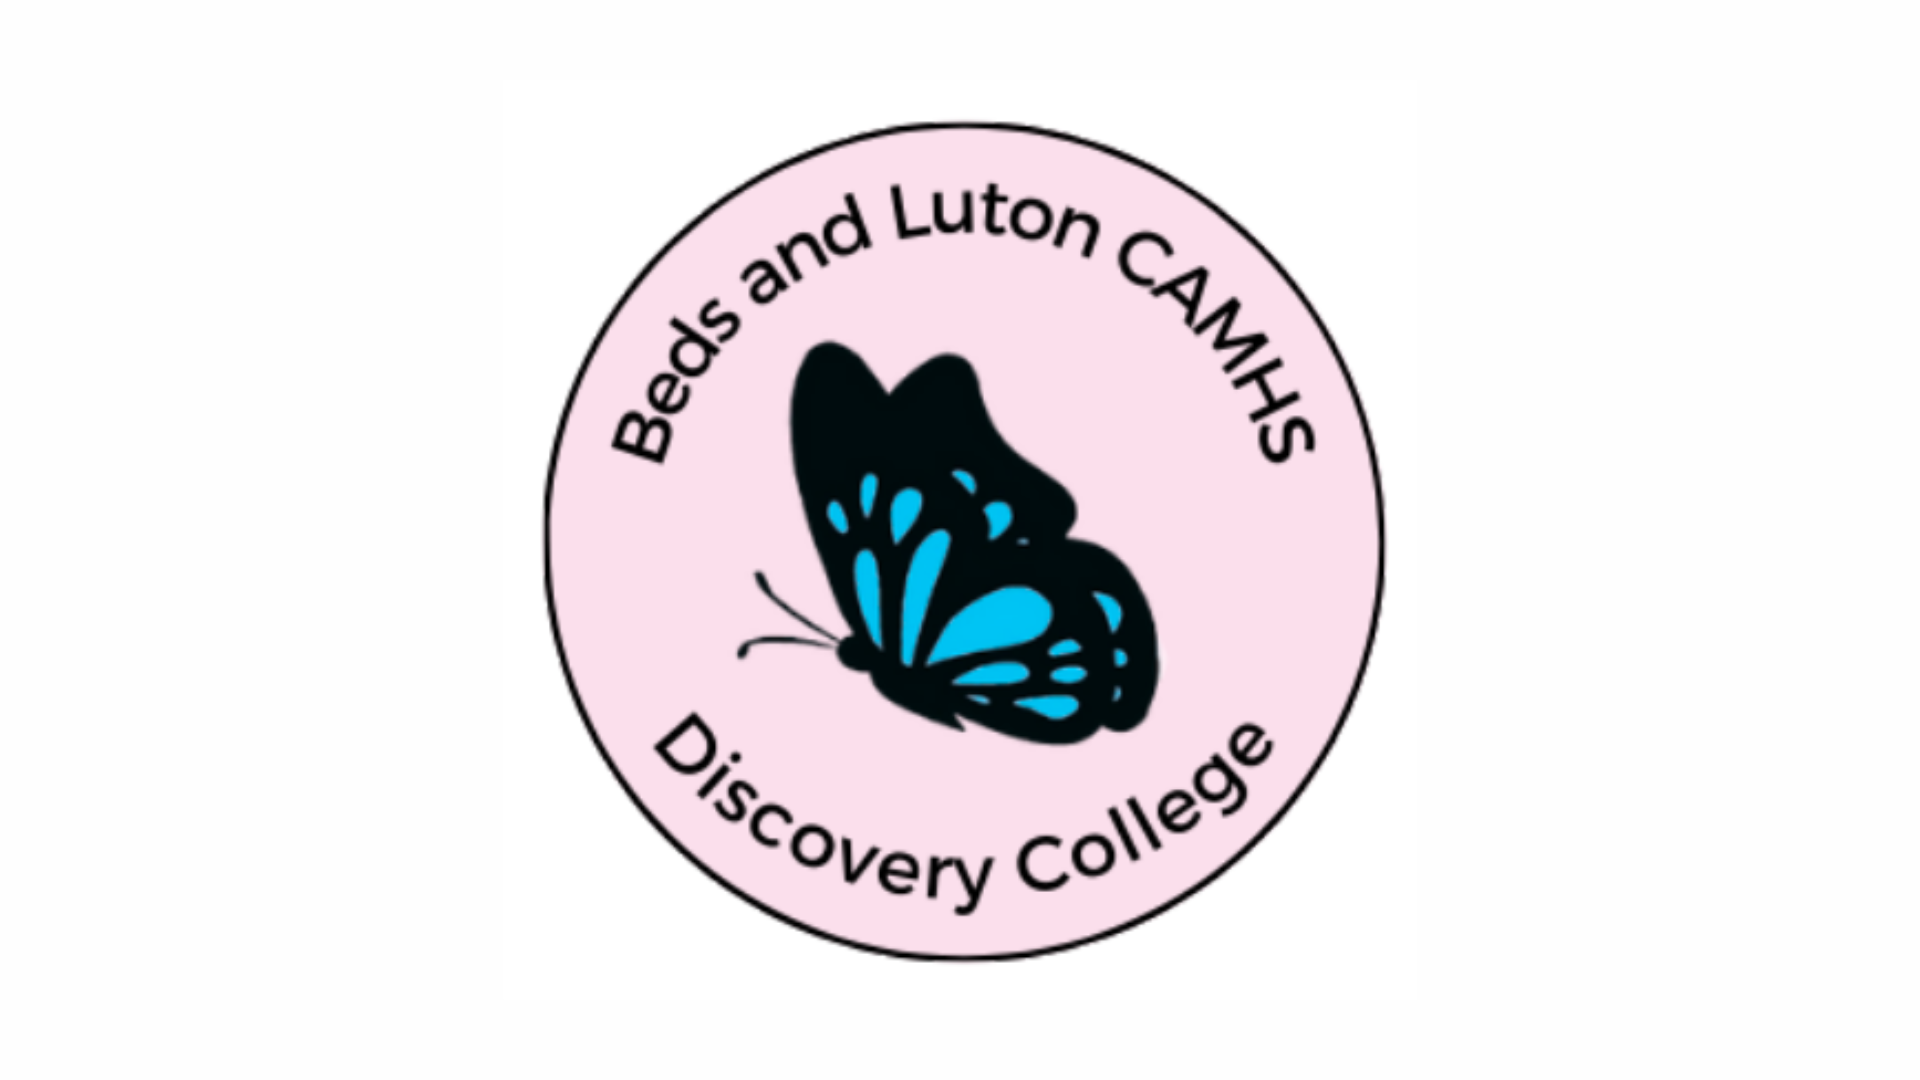 The Discovery College logo